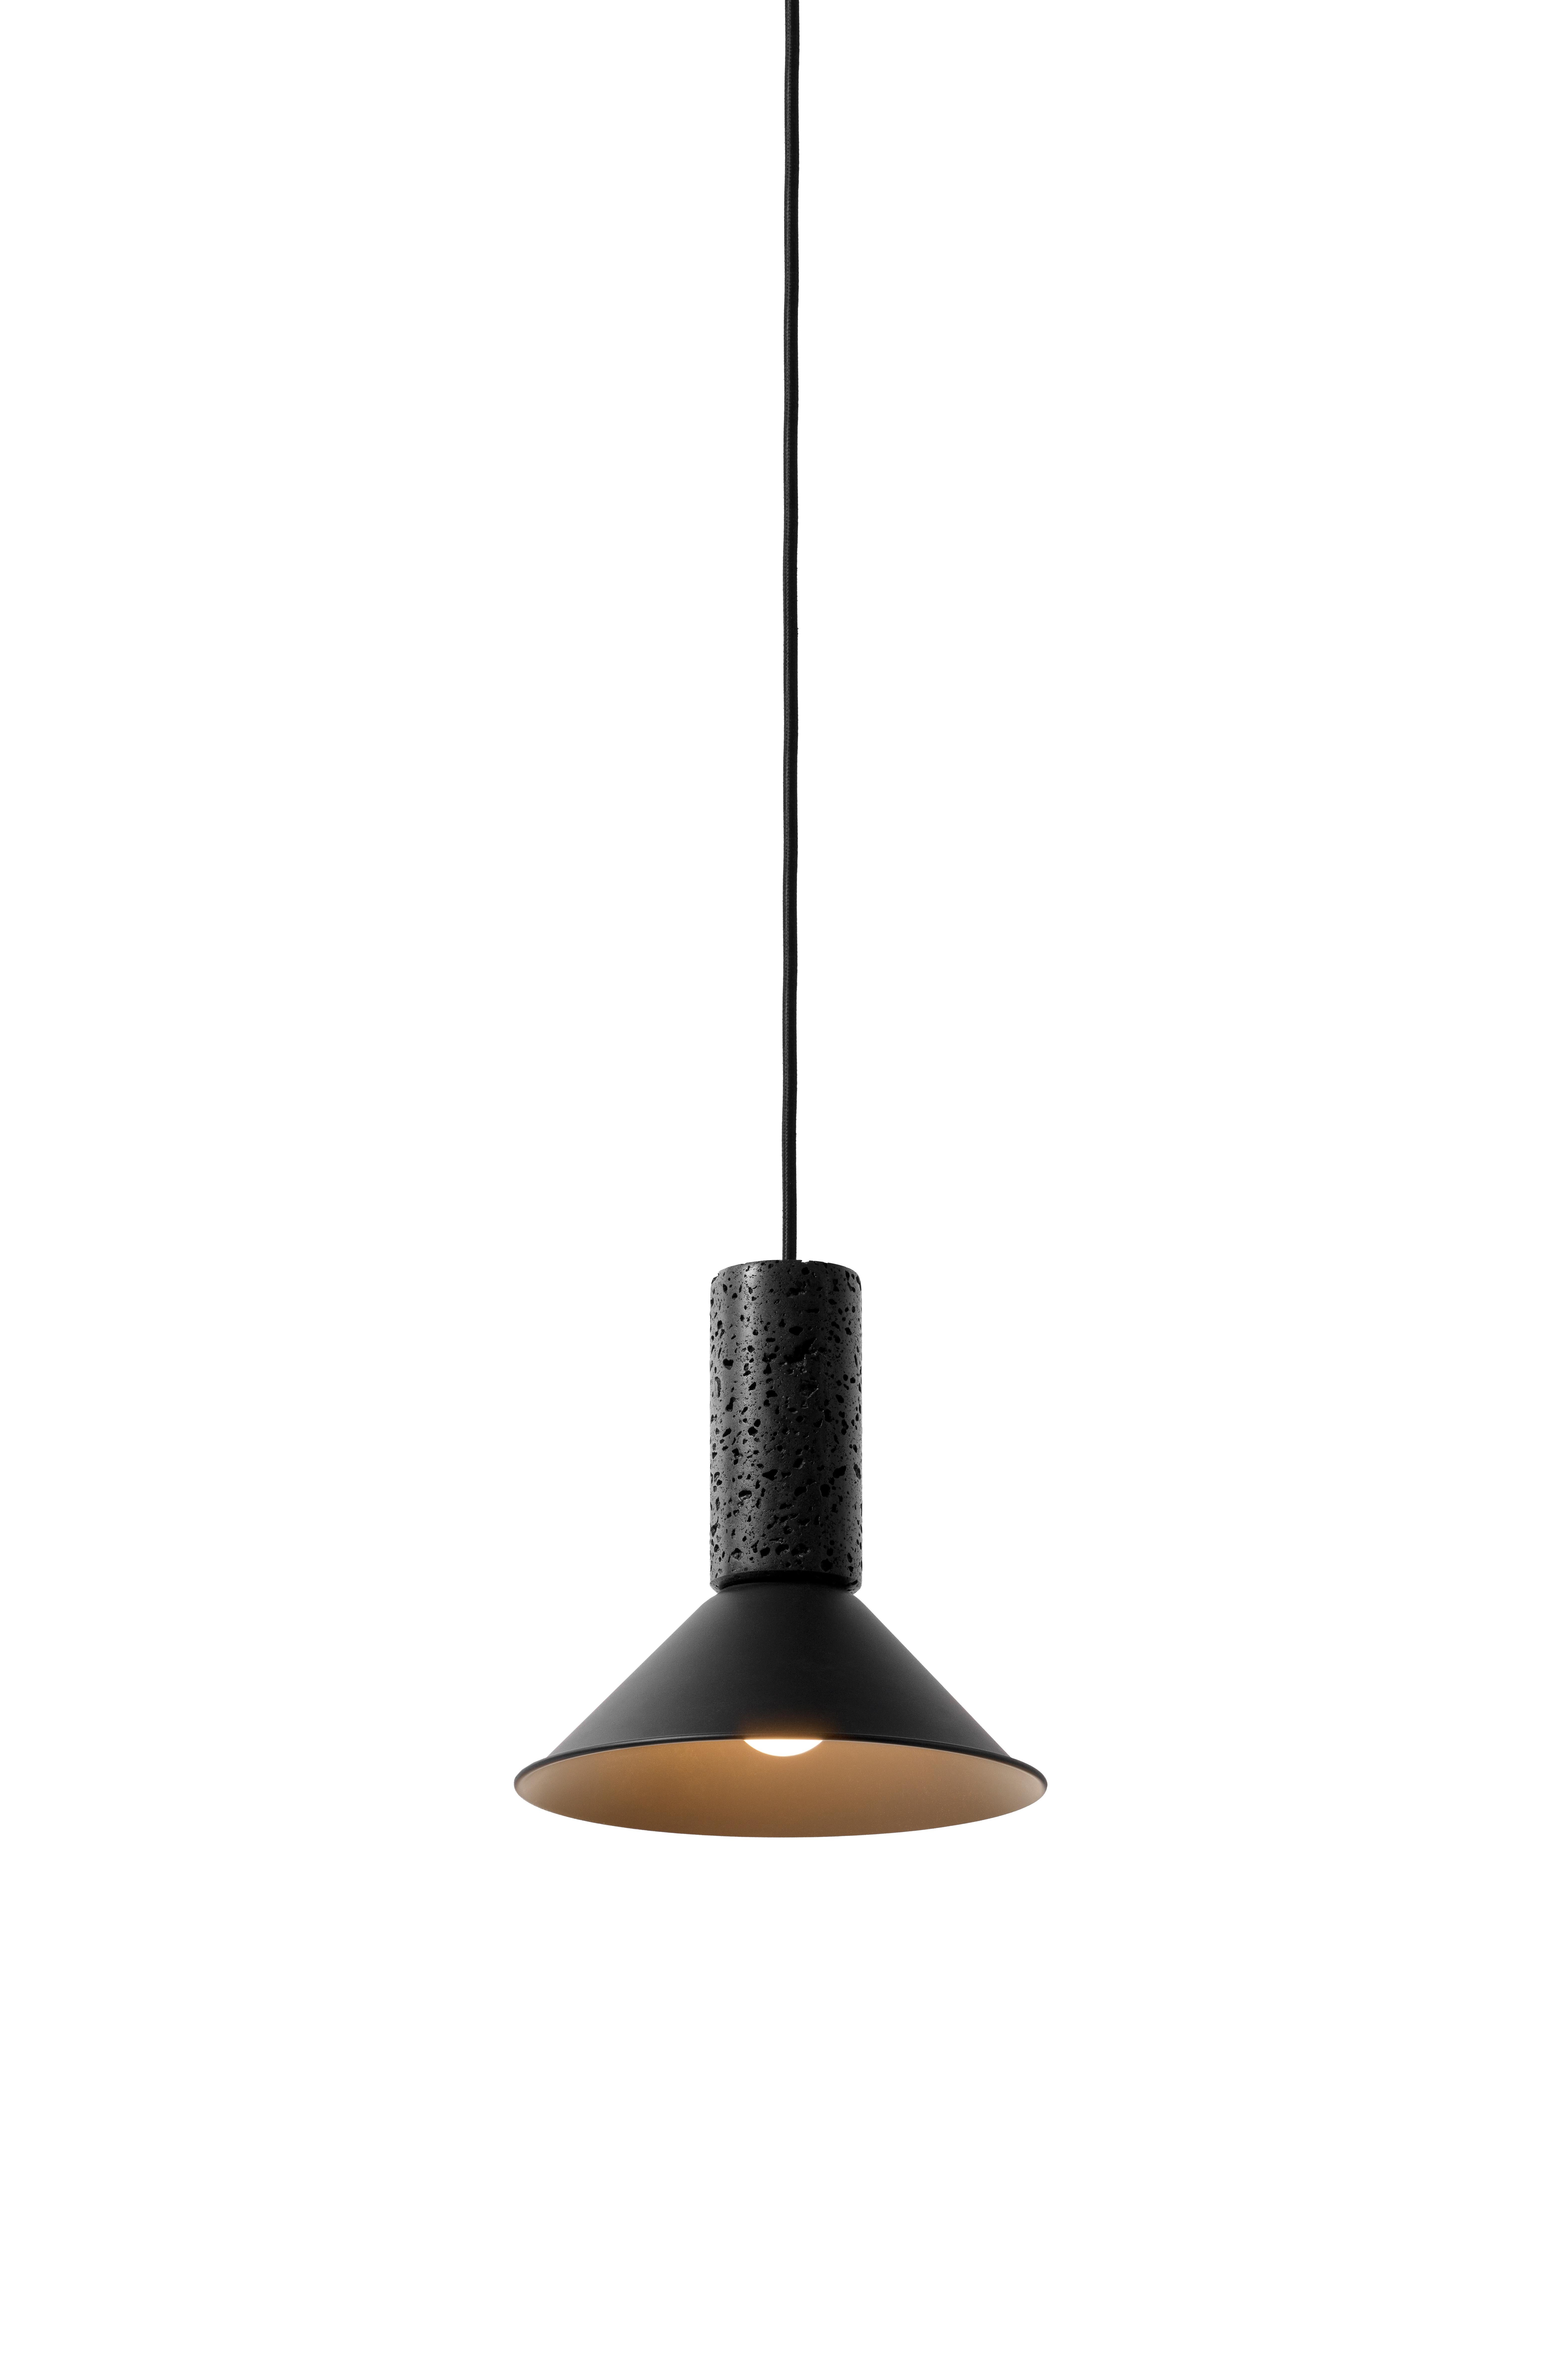 Pendant lamp 'R' by Buzao x Bentu design.
Black lava stone and black aluminum

Measures: 21 cm high, 21 cm diameter
Wire: 2 meters black (adjustable) 
Lamp type: E27 LED 3W 100-240V 80Ra 200LM 2700K - Comptable with US electric system.
Ceiling rose: